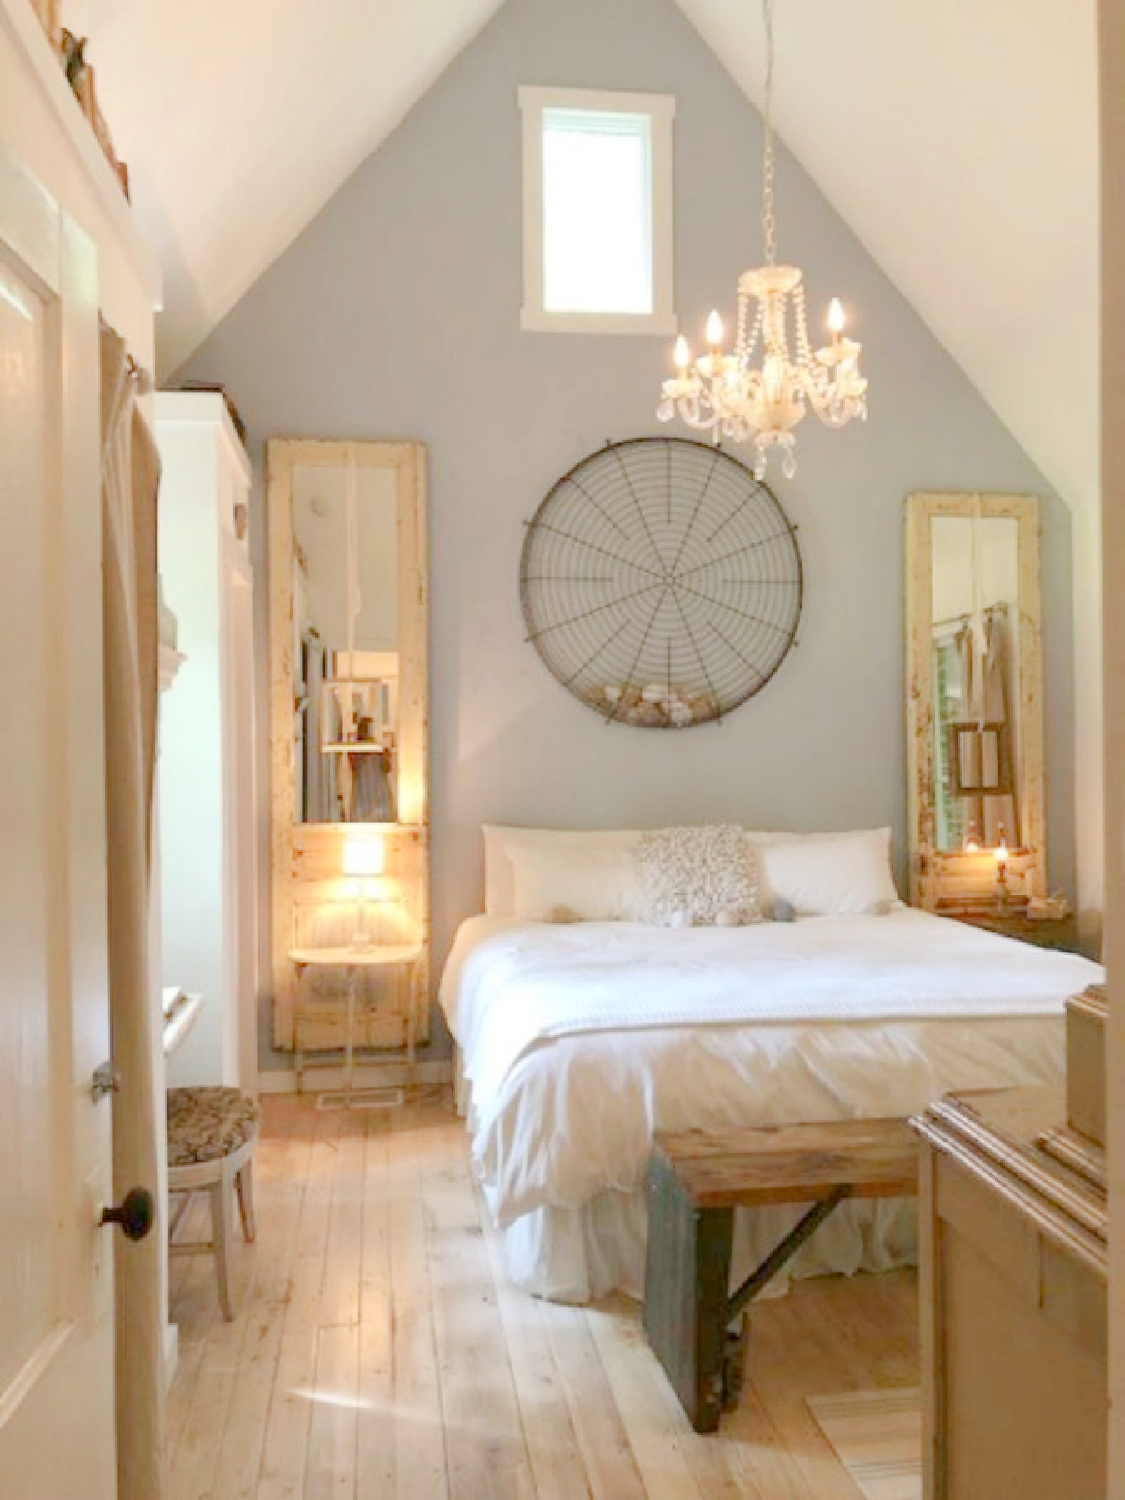 Rustic bedroom in country cottage in Leiper's Fork, TN known as storybook cottage - Hello Lovely Studio.